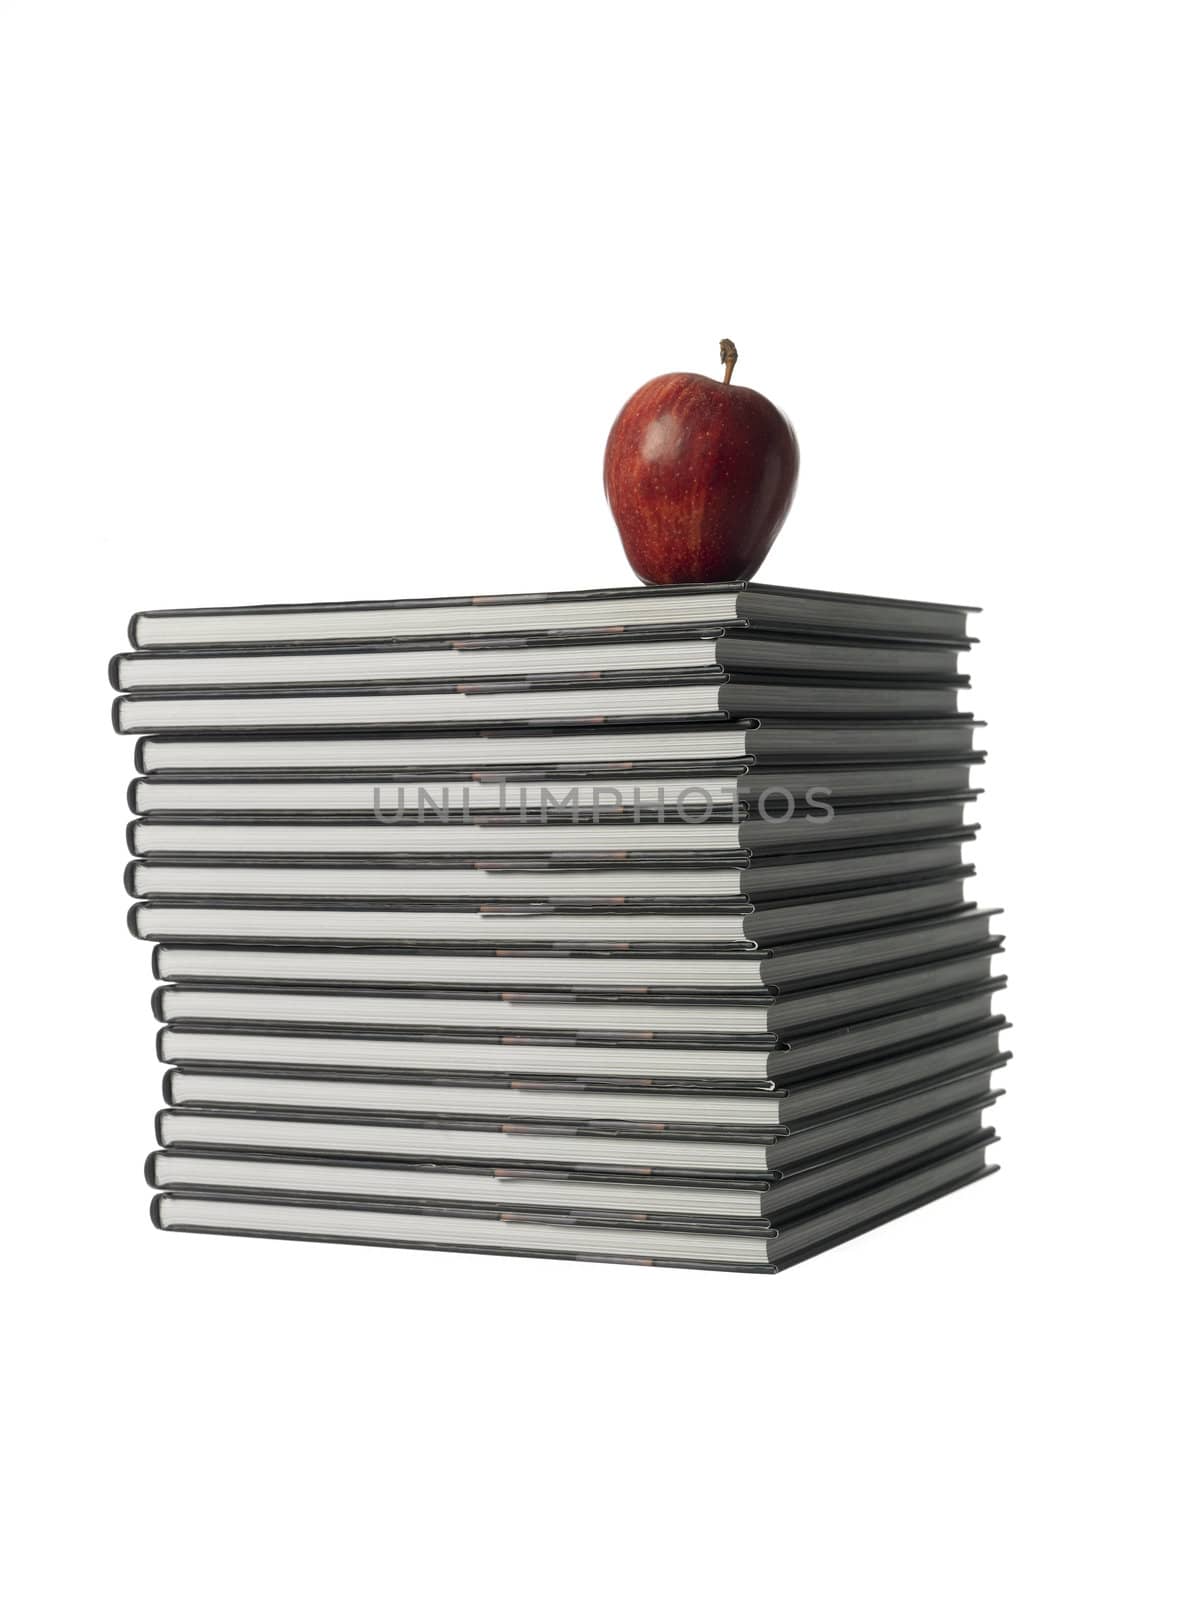 pile of books with a apple by gemenacom